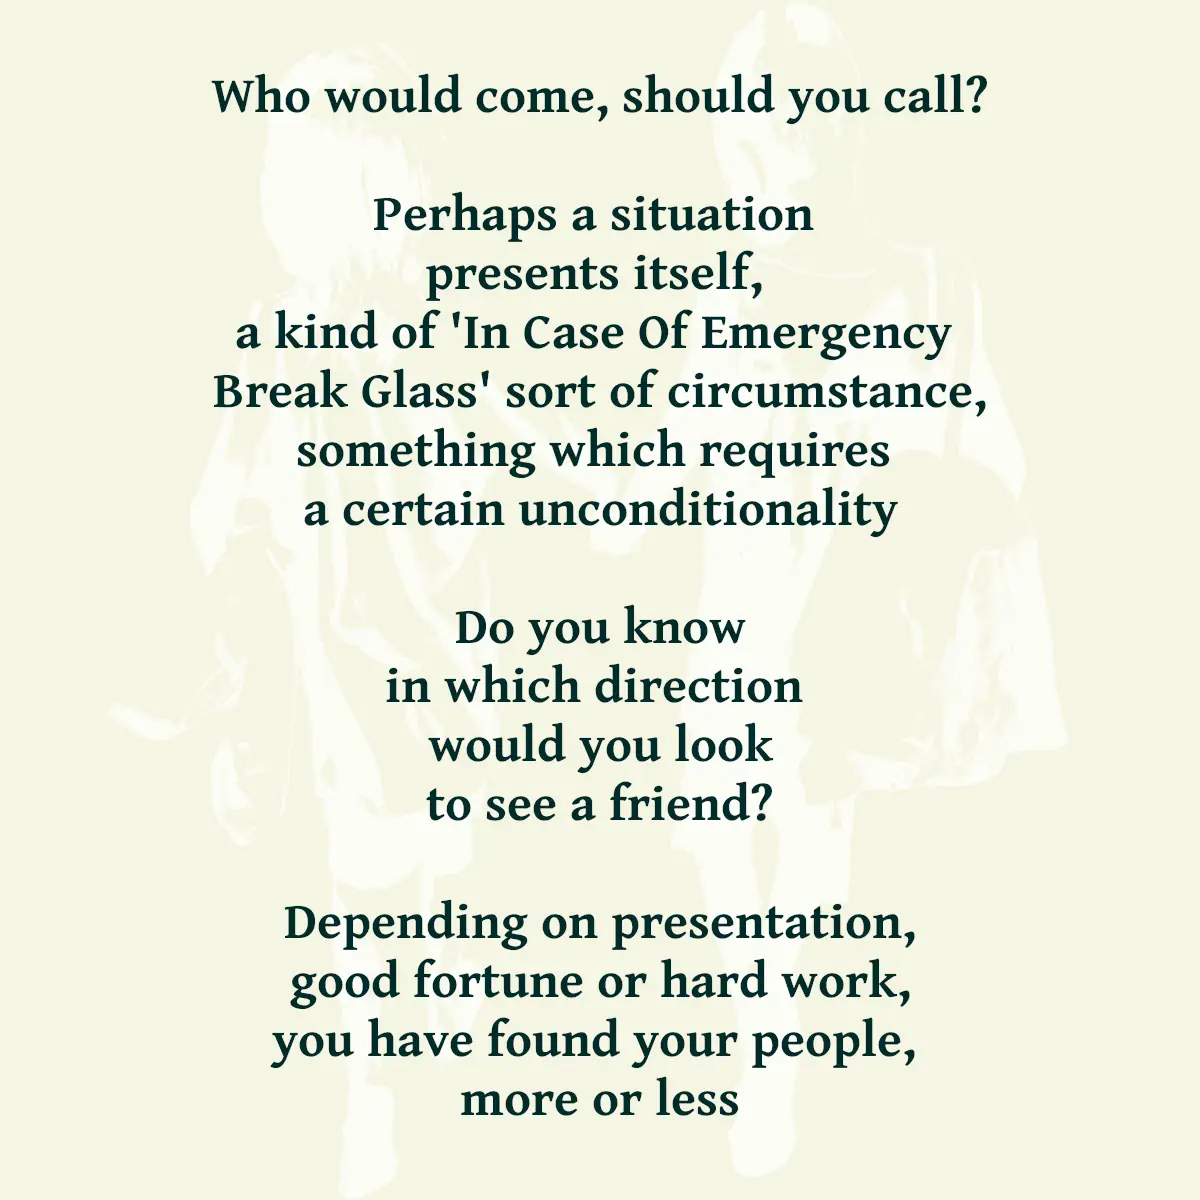 Who would come, should you call? Perhaps a situation presents itself, a kind of 'In Case Of Emergency Break Glass' sort of circumstance, something which requires a certain unconditionality Do you know in which direction would you look to see a friend? Depending on presentation, good fortune or hard work, you have found your people, more or less